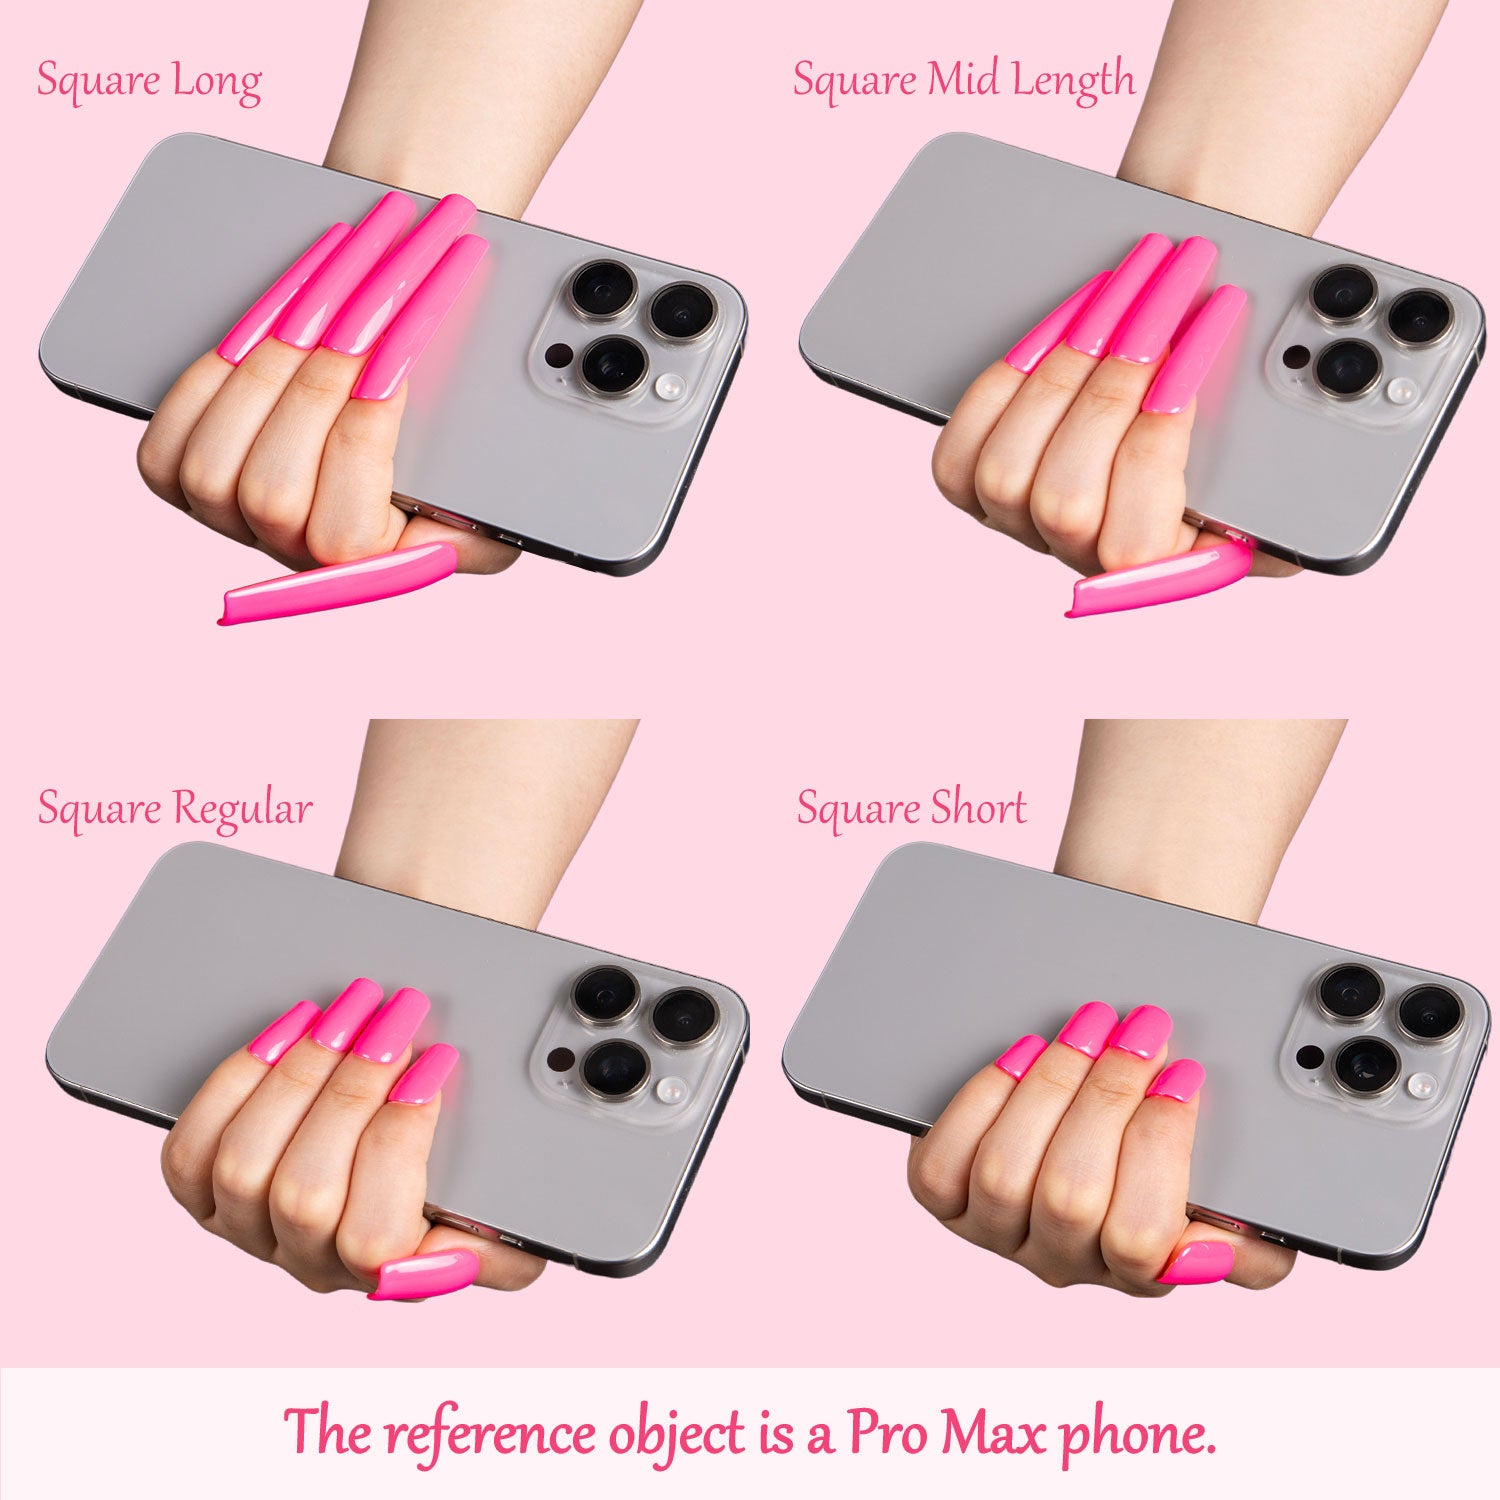 Comparison of four nail lengths holding a Pro Max phone: Square Long, Square Mid Length, Square Regular, and Square Short. The Pro Max phone is used as a size reference.